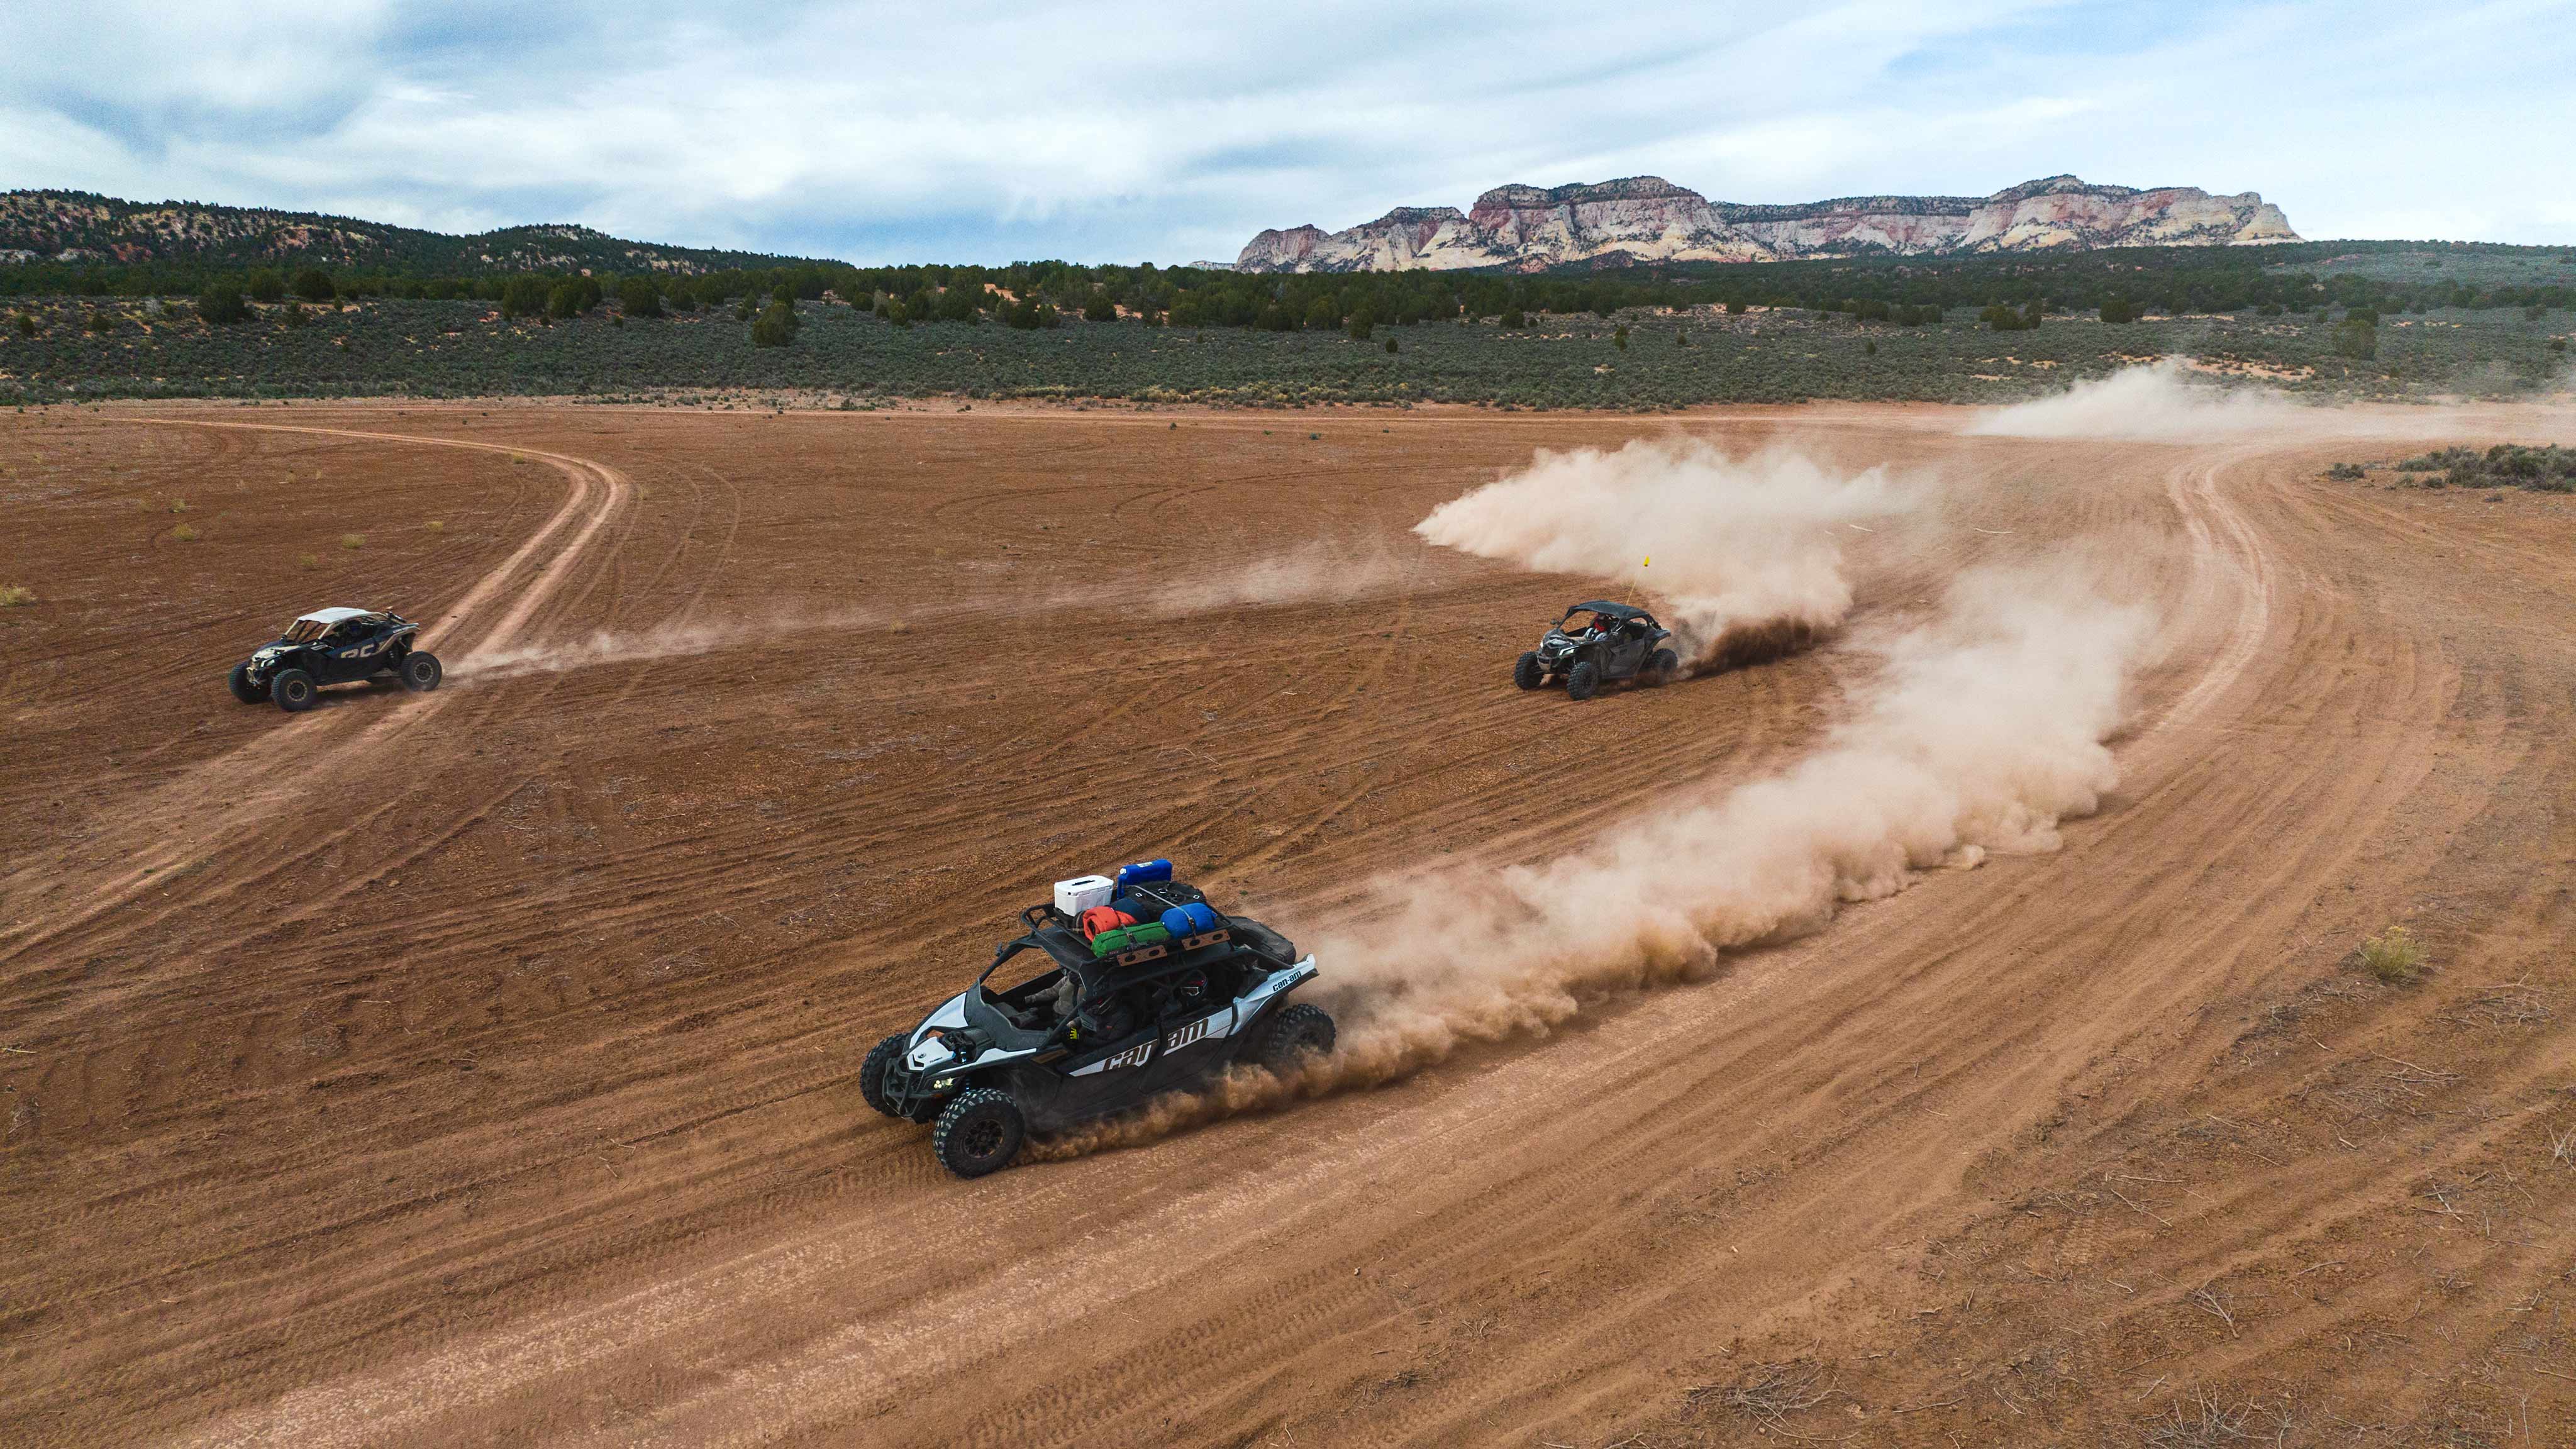 Can-Am Maverick side-by-sides kicking up clouds of dust and driving together in a desert setting